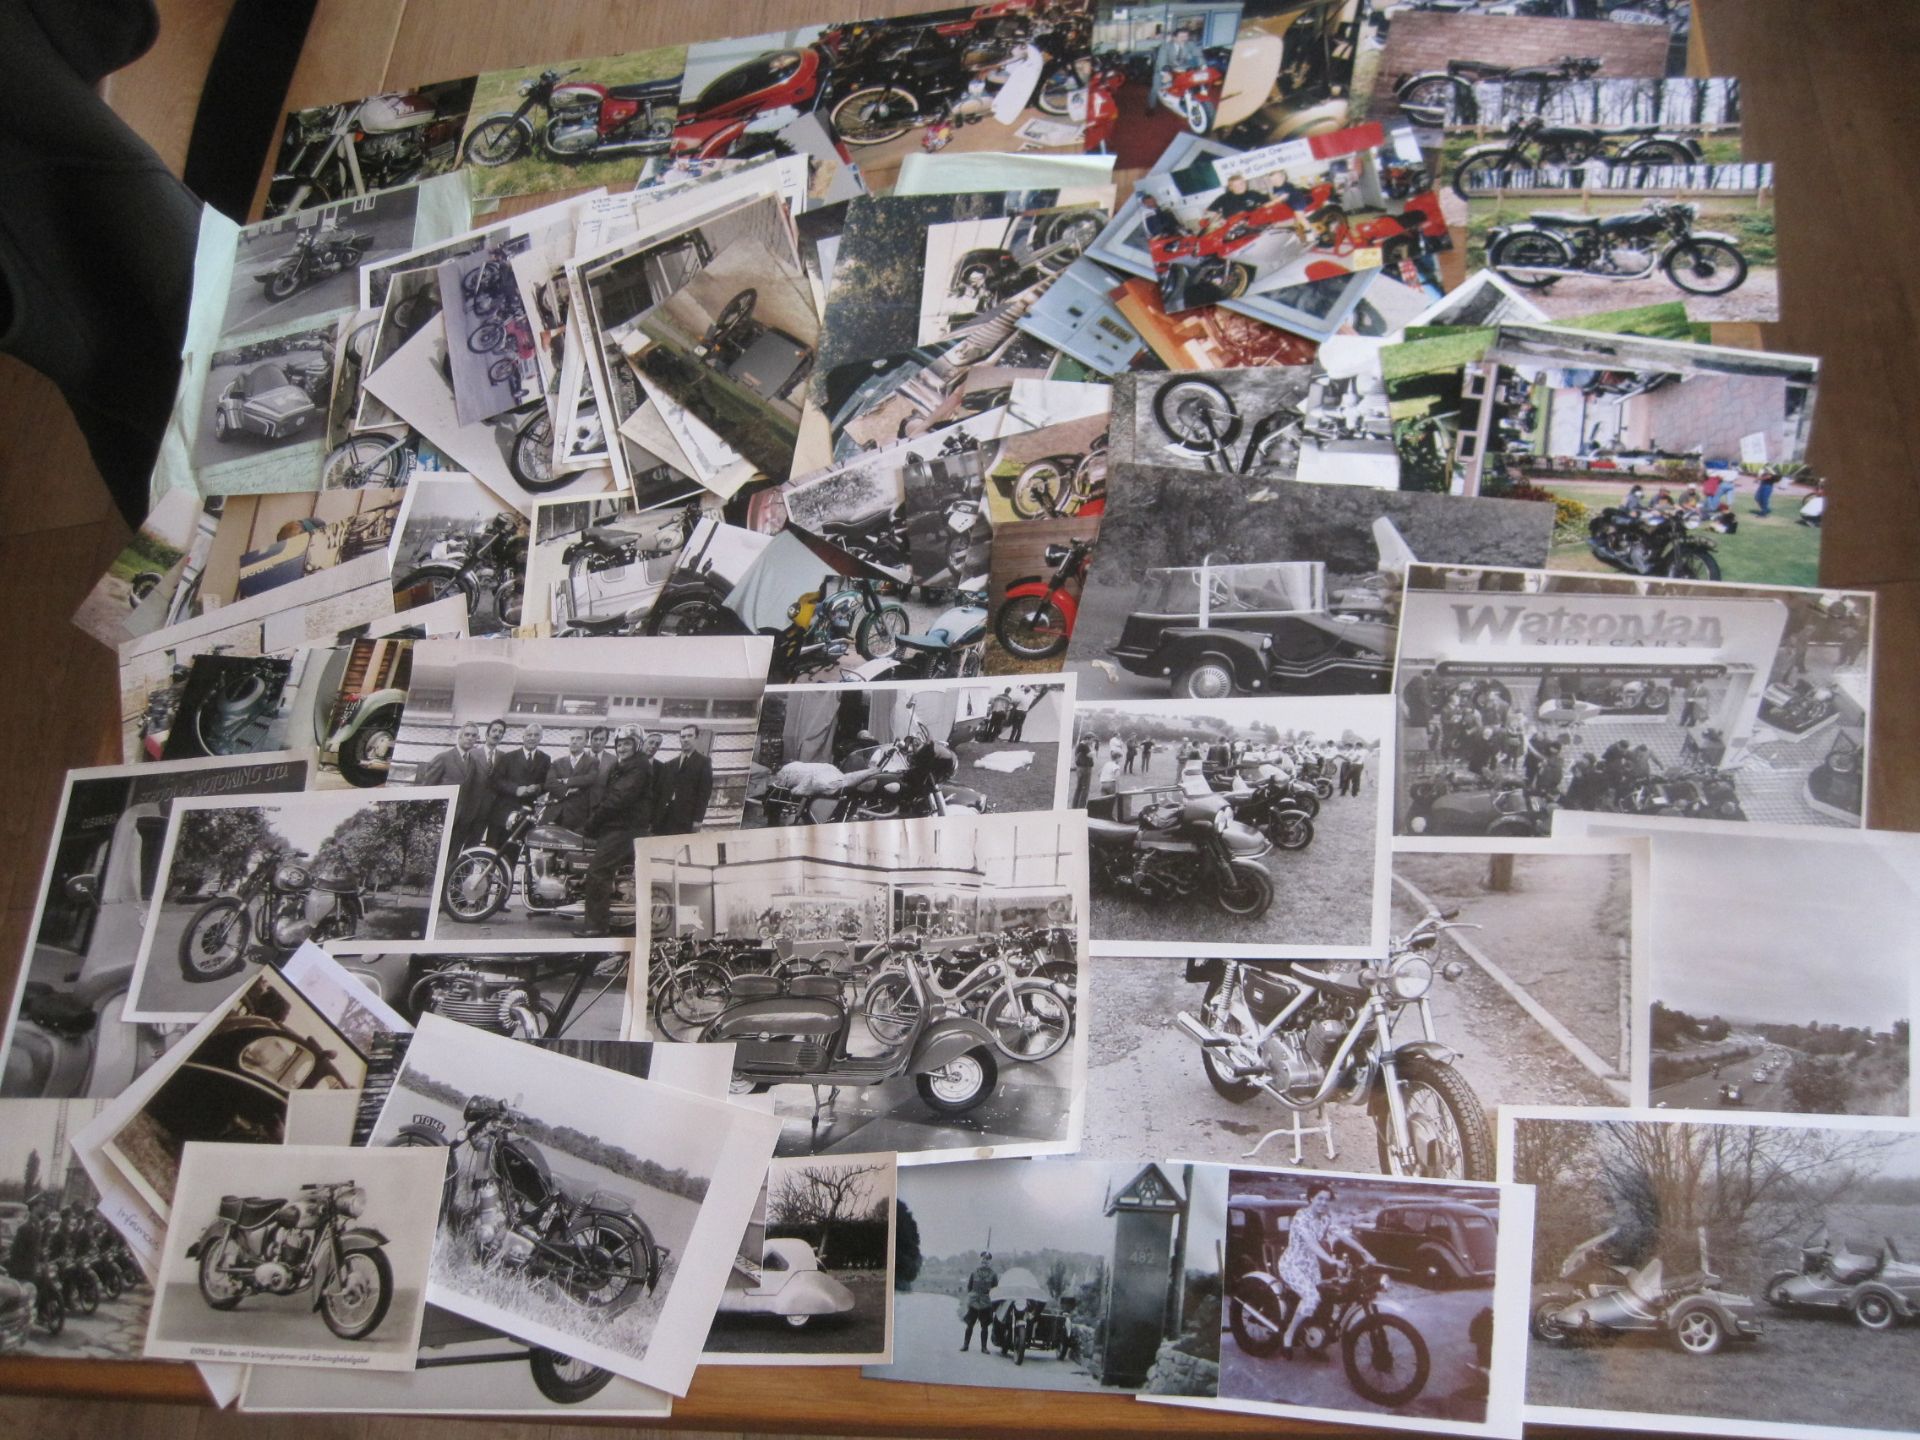 Large quantity of photos of motorcycles, shows, rallies etc. Many annotated by Mick walker, includes